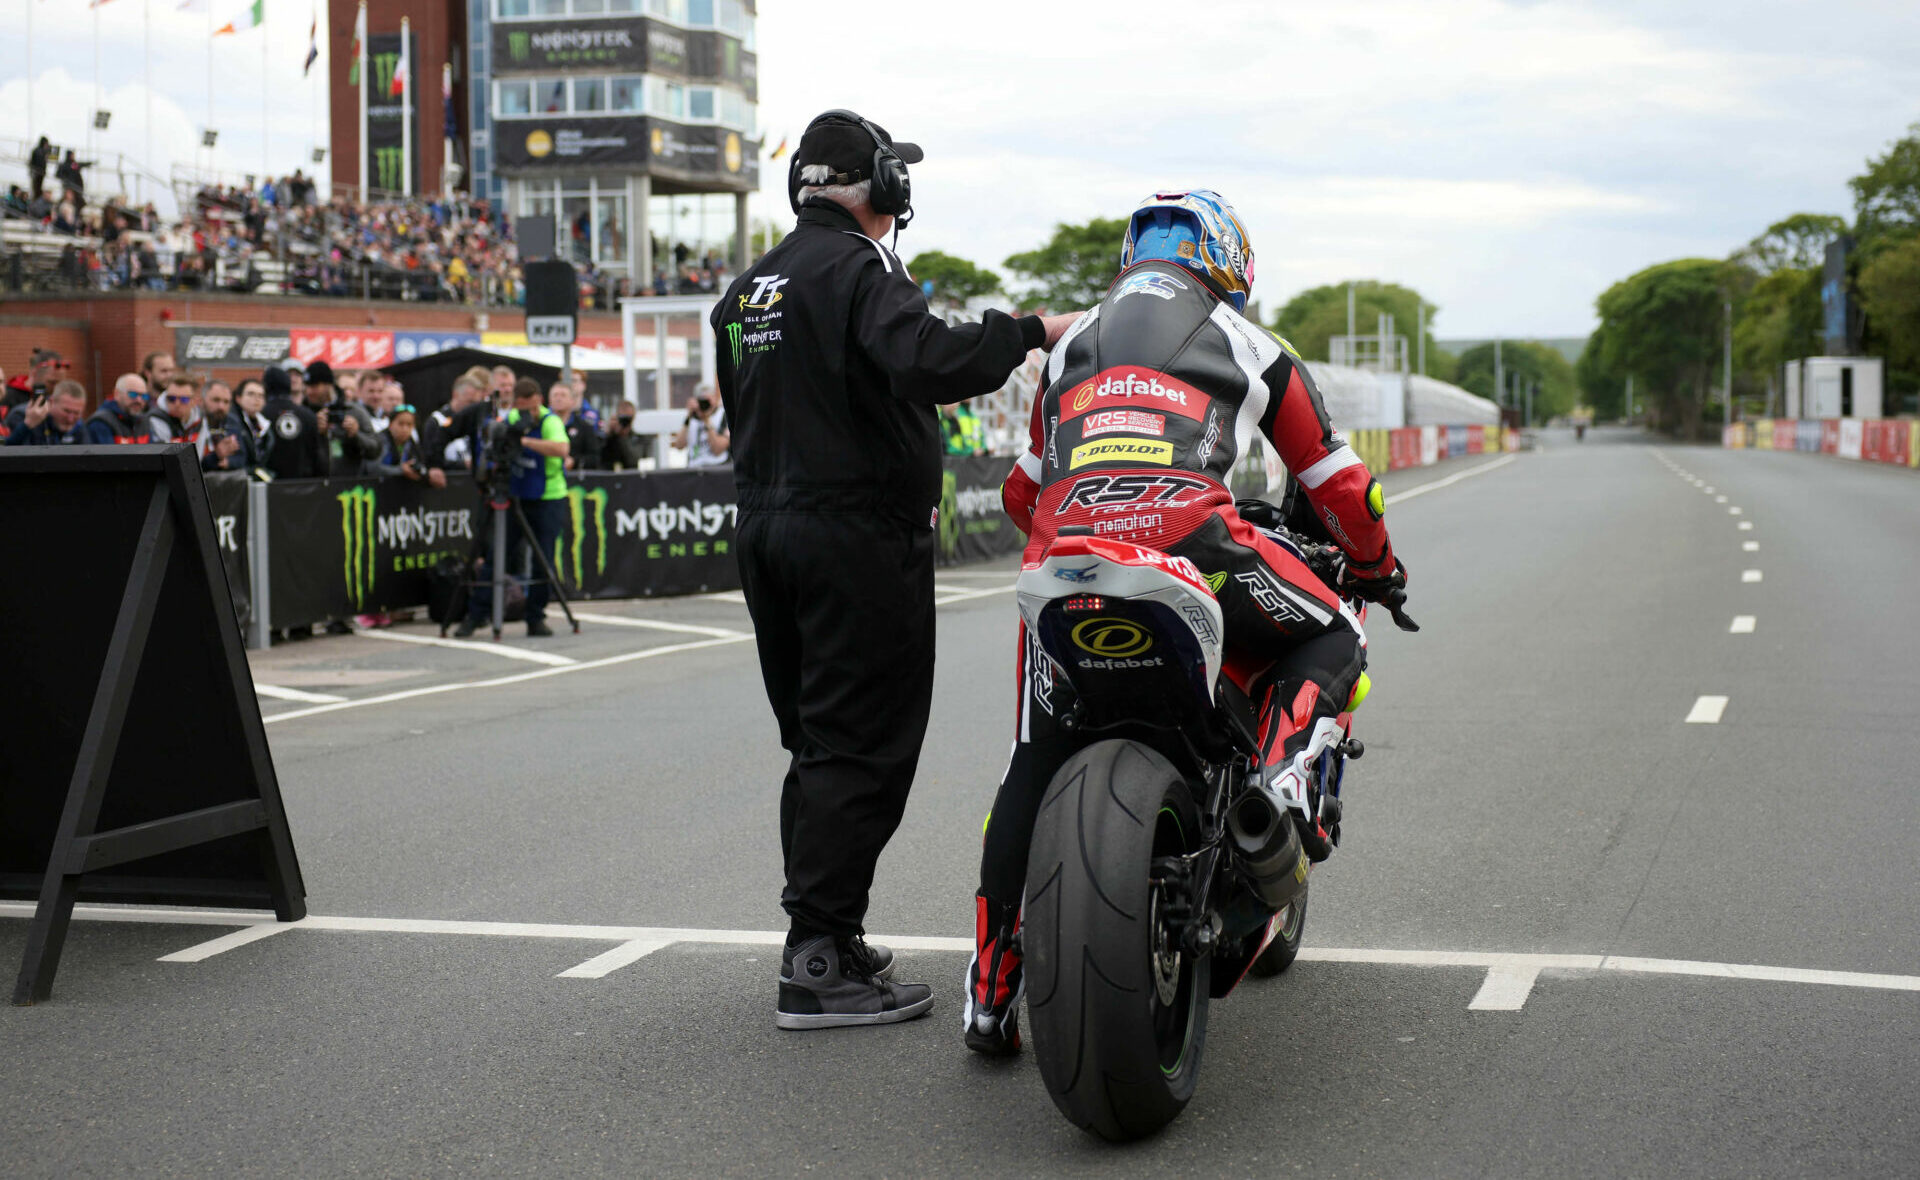 A rider at the start line at the Isle of Man TT. Photo courtesy Isle of Man TT Press Office.